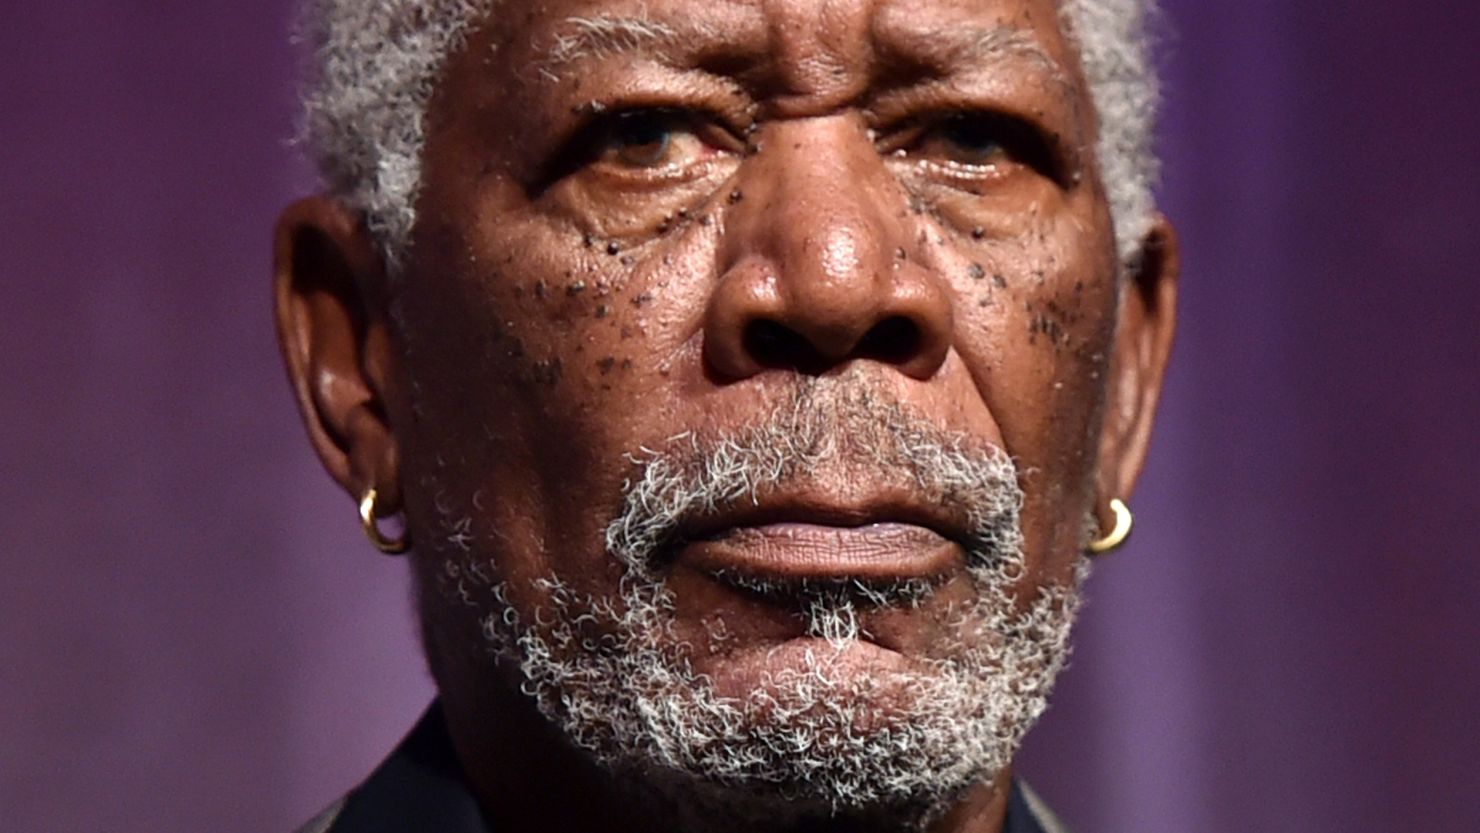 A private plane carrying actor Morgan Freeman made a forced landing in Mississippi.